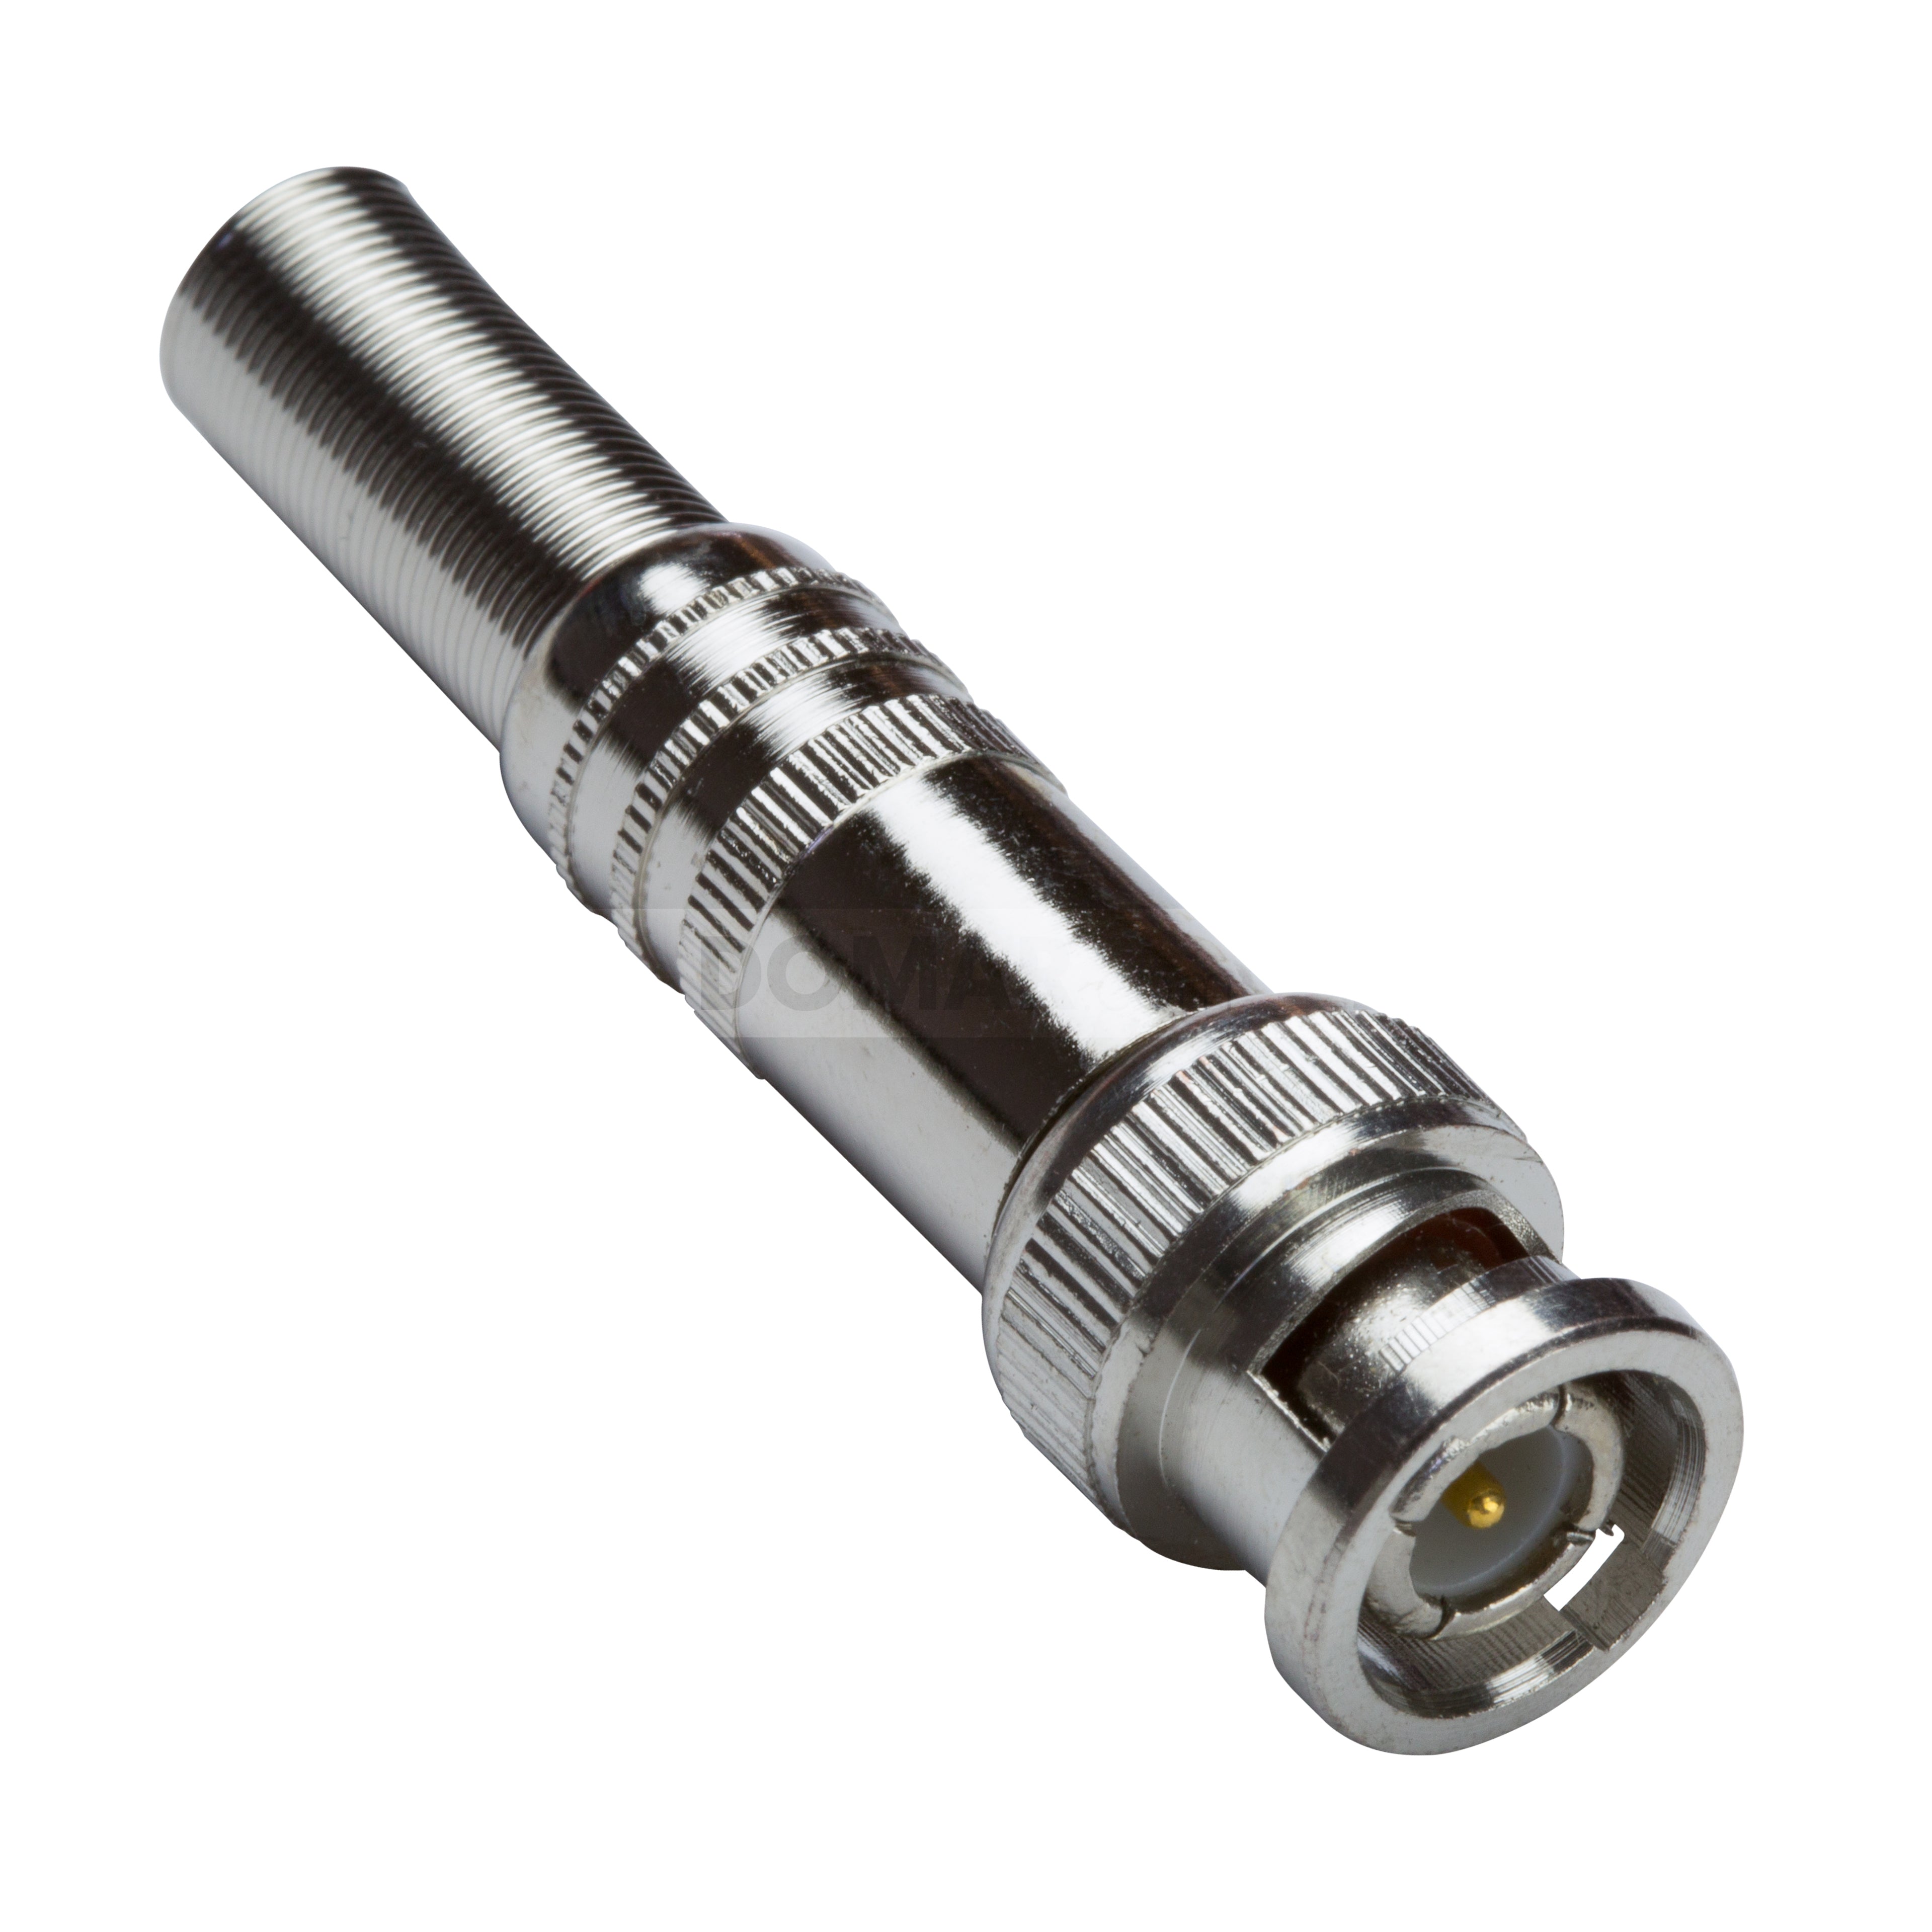 2 Pack of BNC Male Screw On Connectors